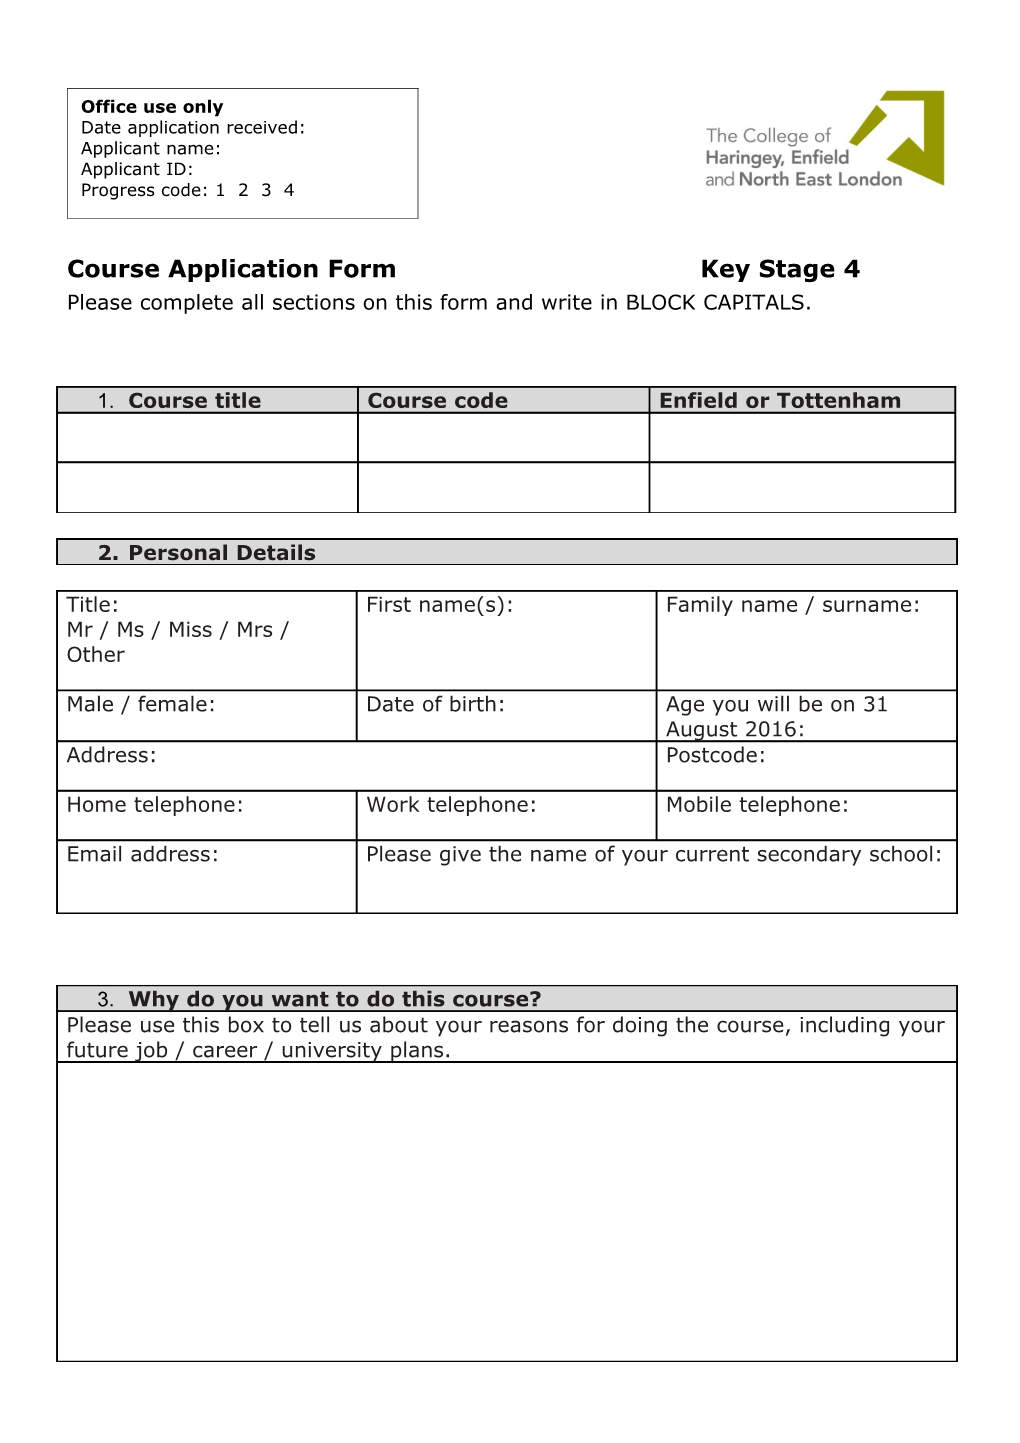 Course Application Form Key Stage 4